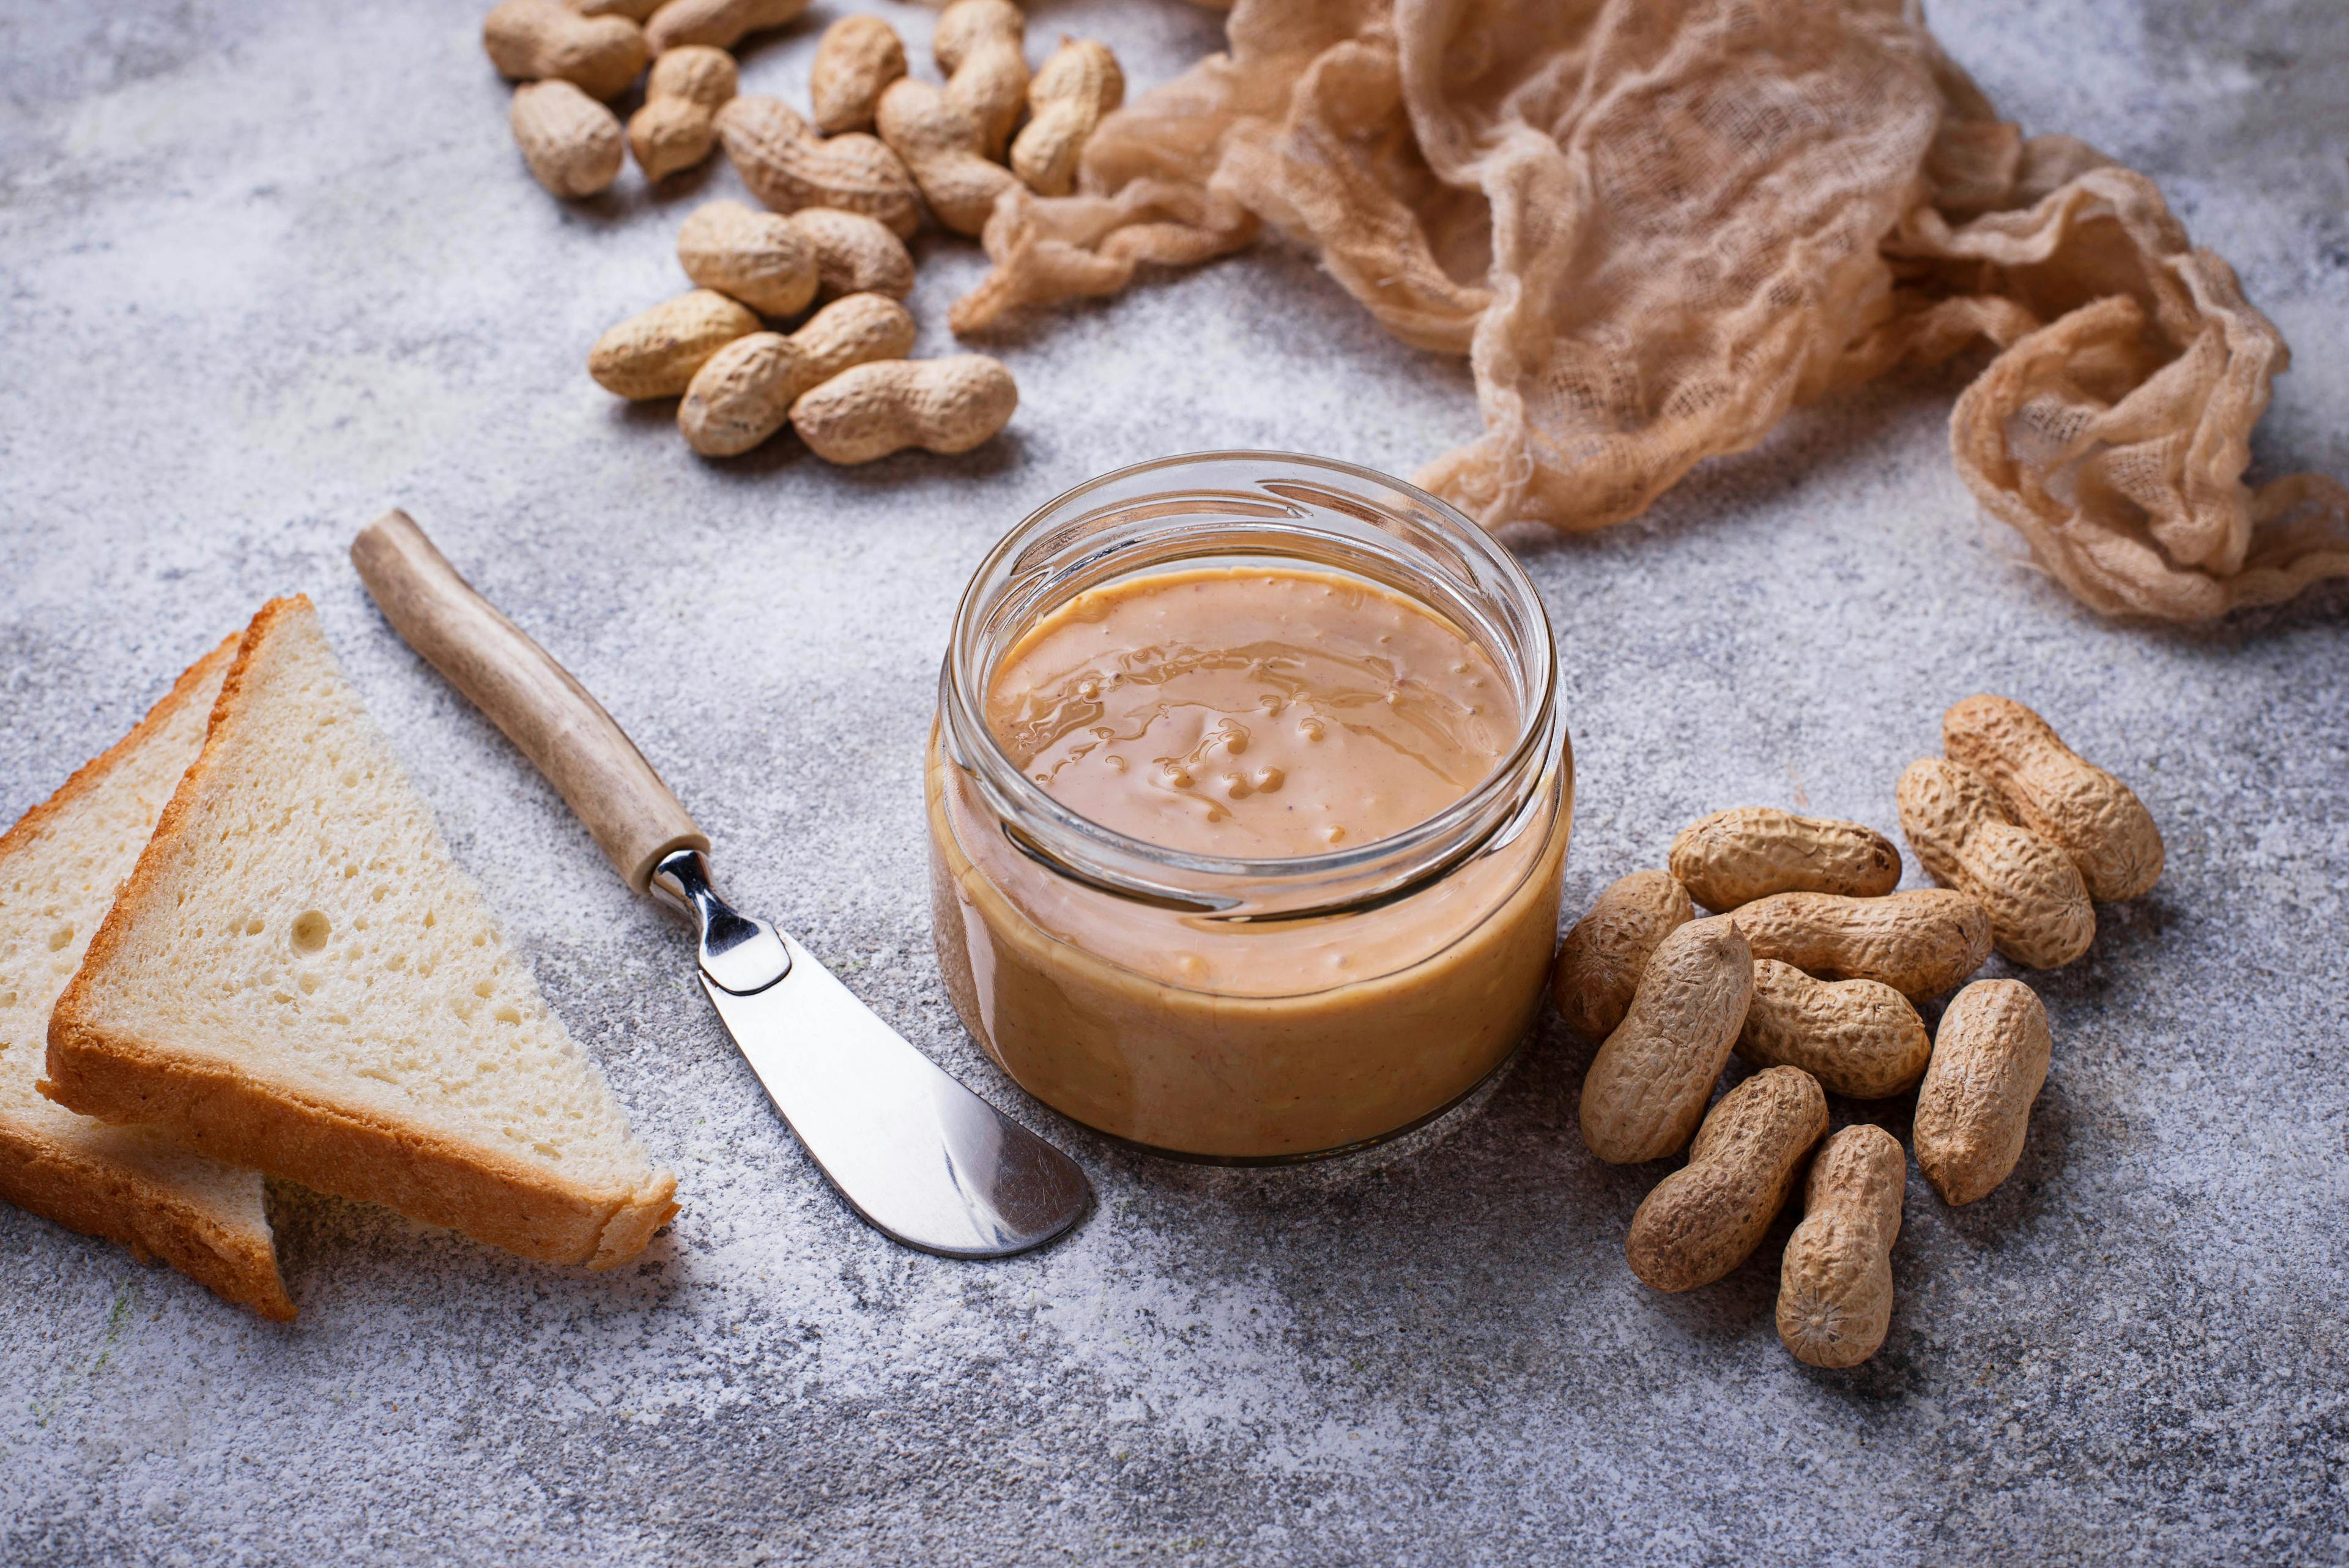 POLL: What is Your Current Approach to Peanut Allergies in Your Atopic Dermatitis Patients?